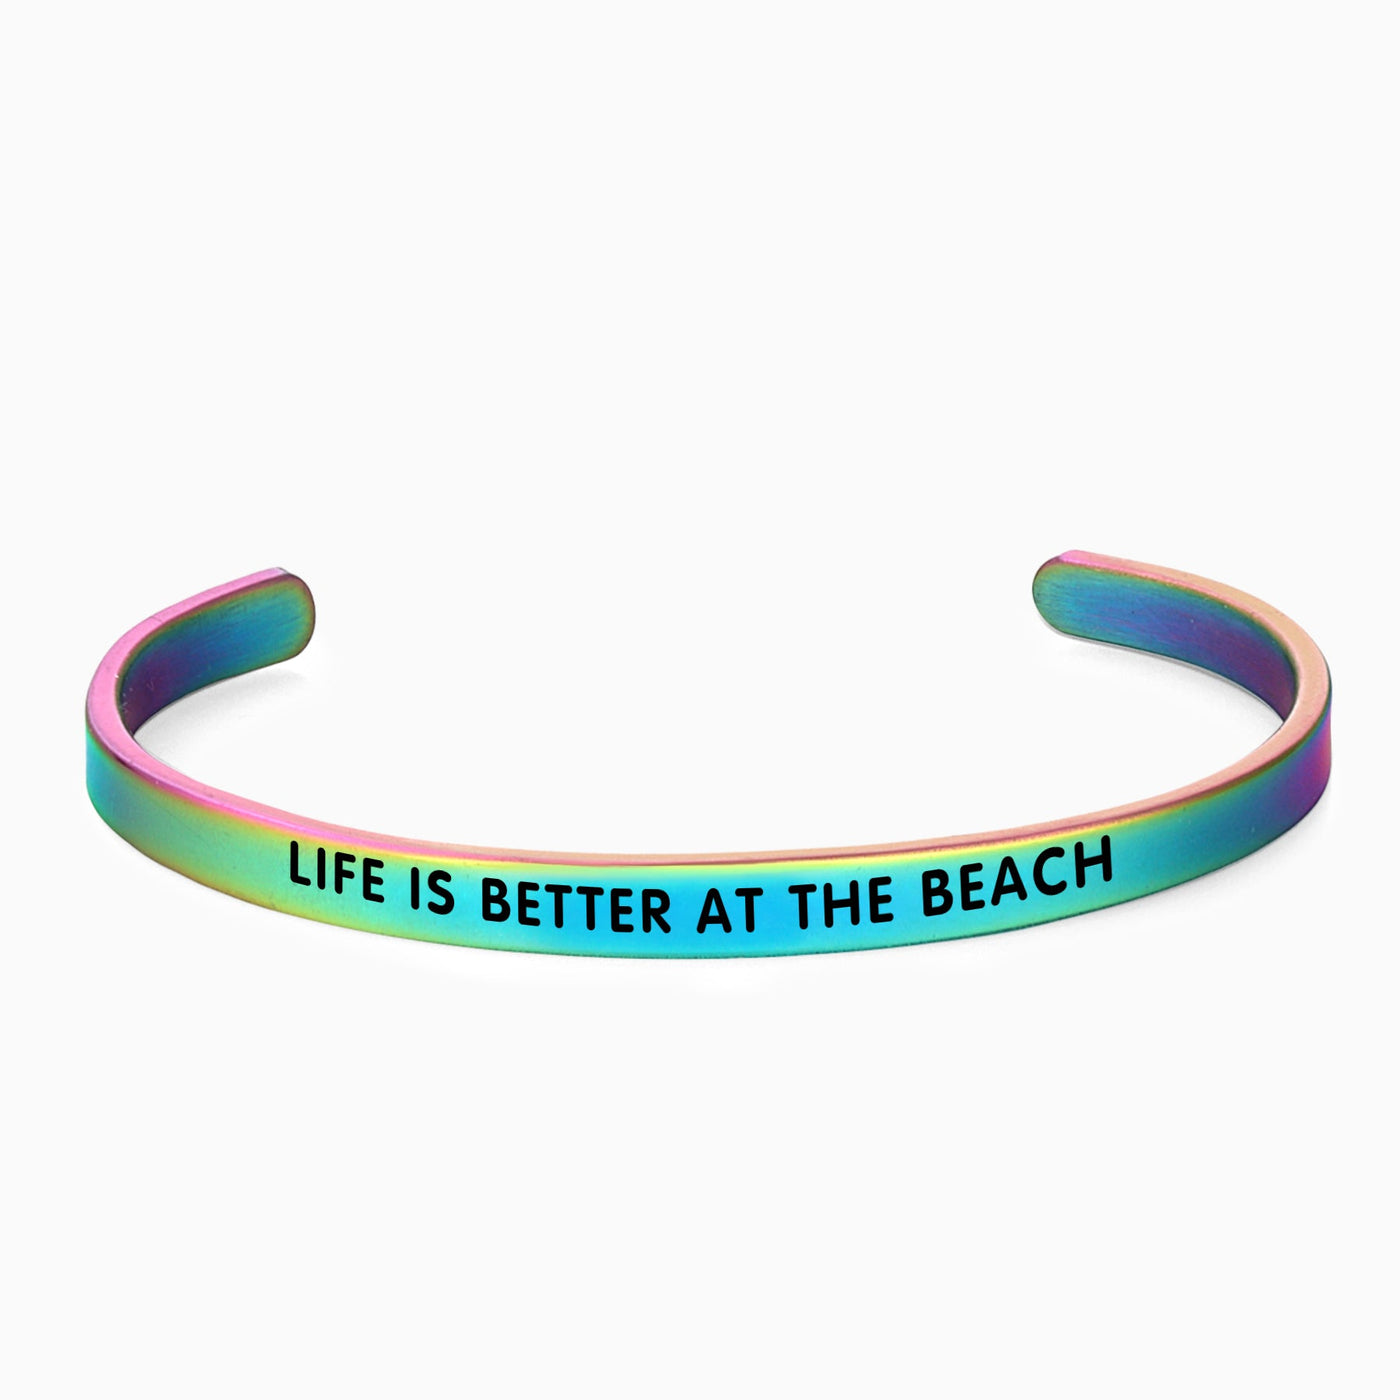 LIFE IS BETTER AT THE BEACH - OTANTO